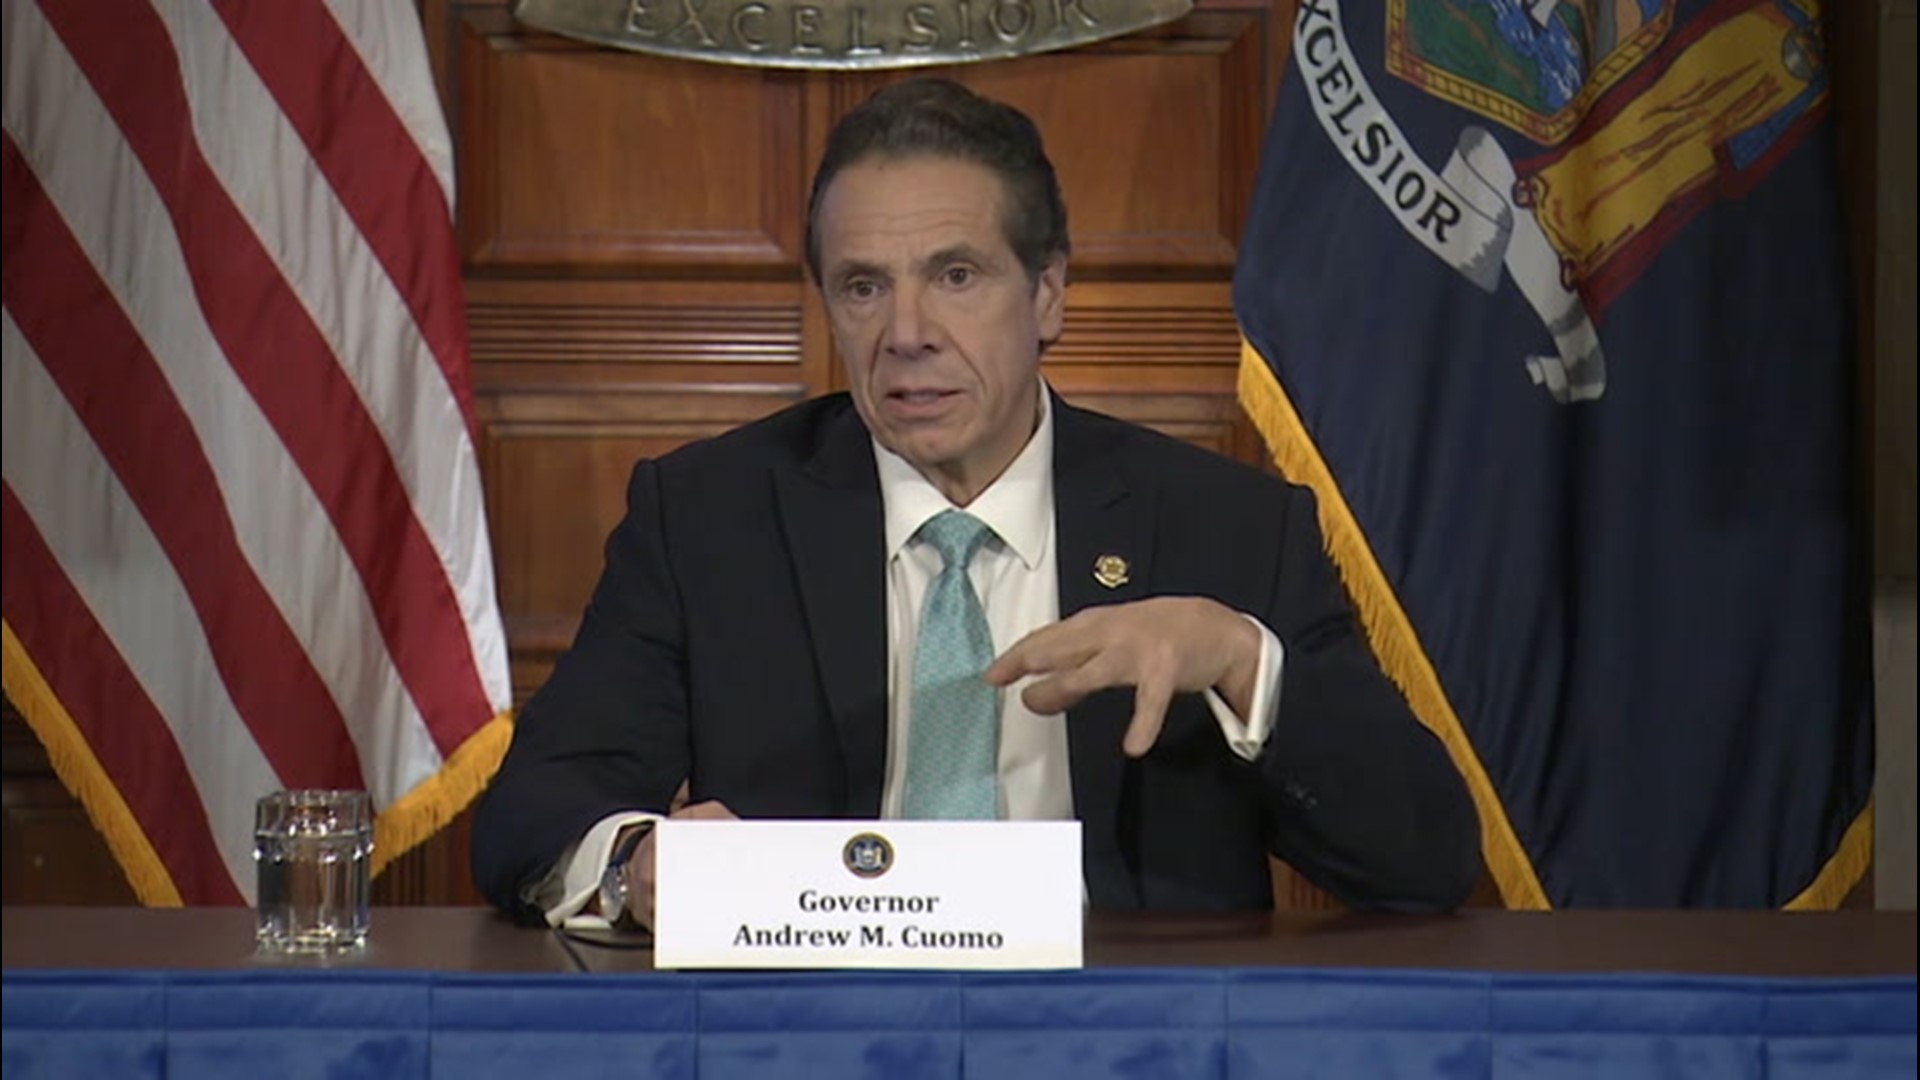 New York Governor Andrew Cuomo explains what he believes would be the best method of stopping the spread of the coronavirus in the United States.